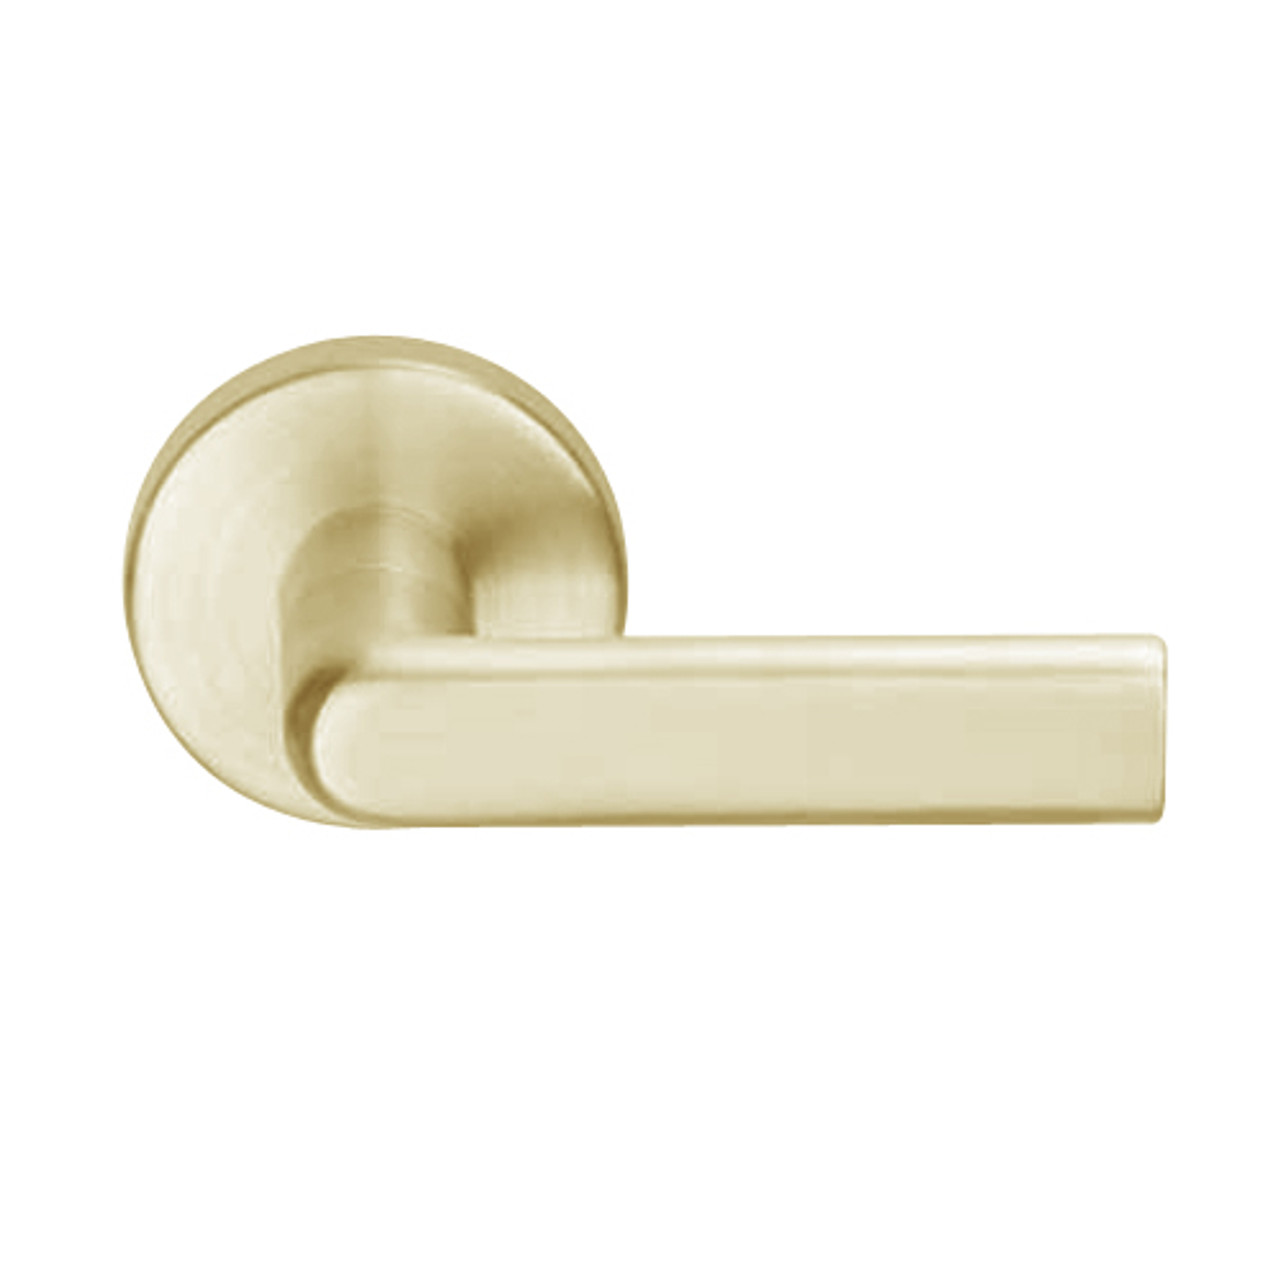 L9456L-01B-606 Schlage L Series Less Cylinder Corridor with Deadbolt Commercial Mortise Lock with 01 Cast Lever Design in Satin Brass